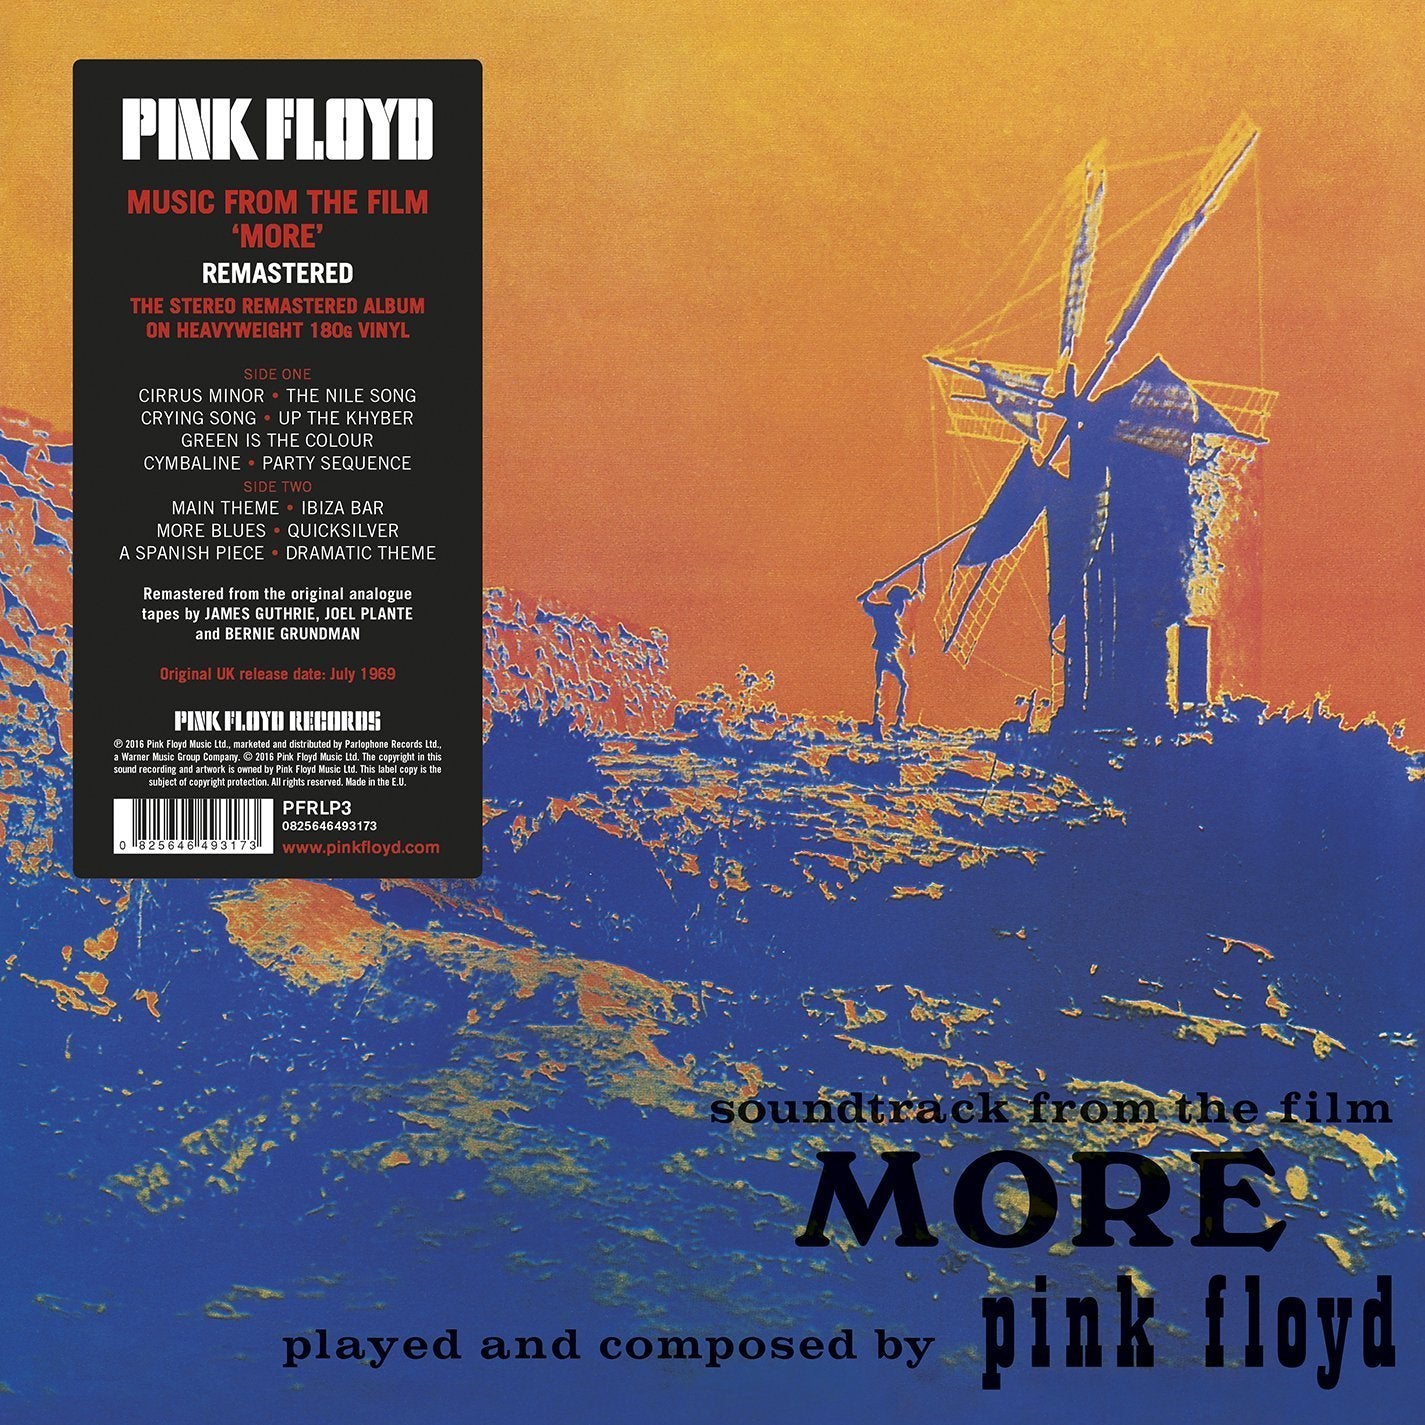 LP PINK FLOYD MUSIC FROM THE FILM MORE